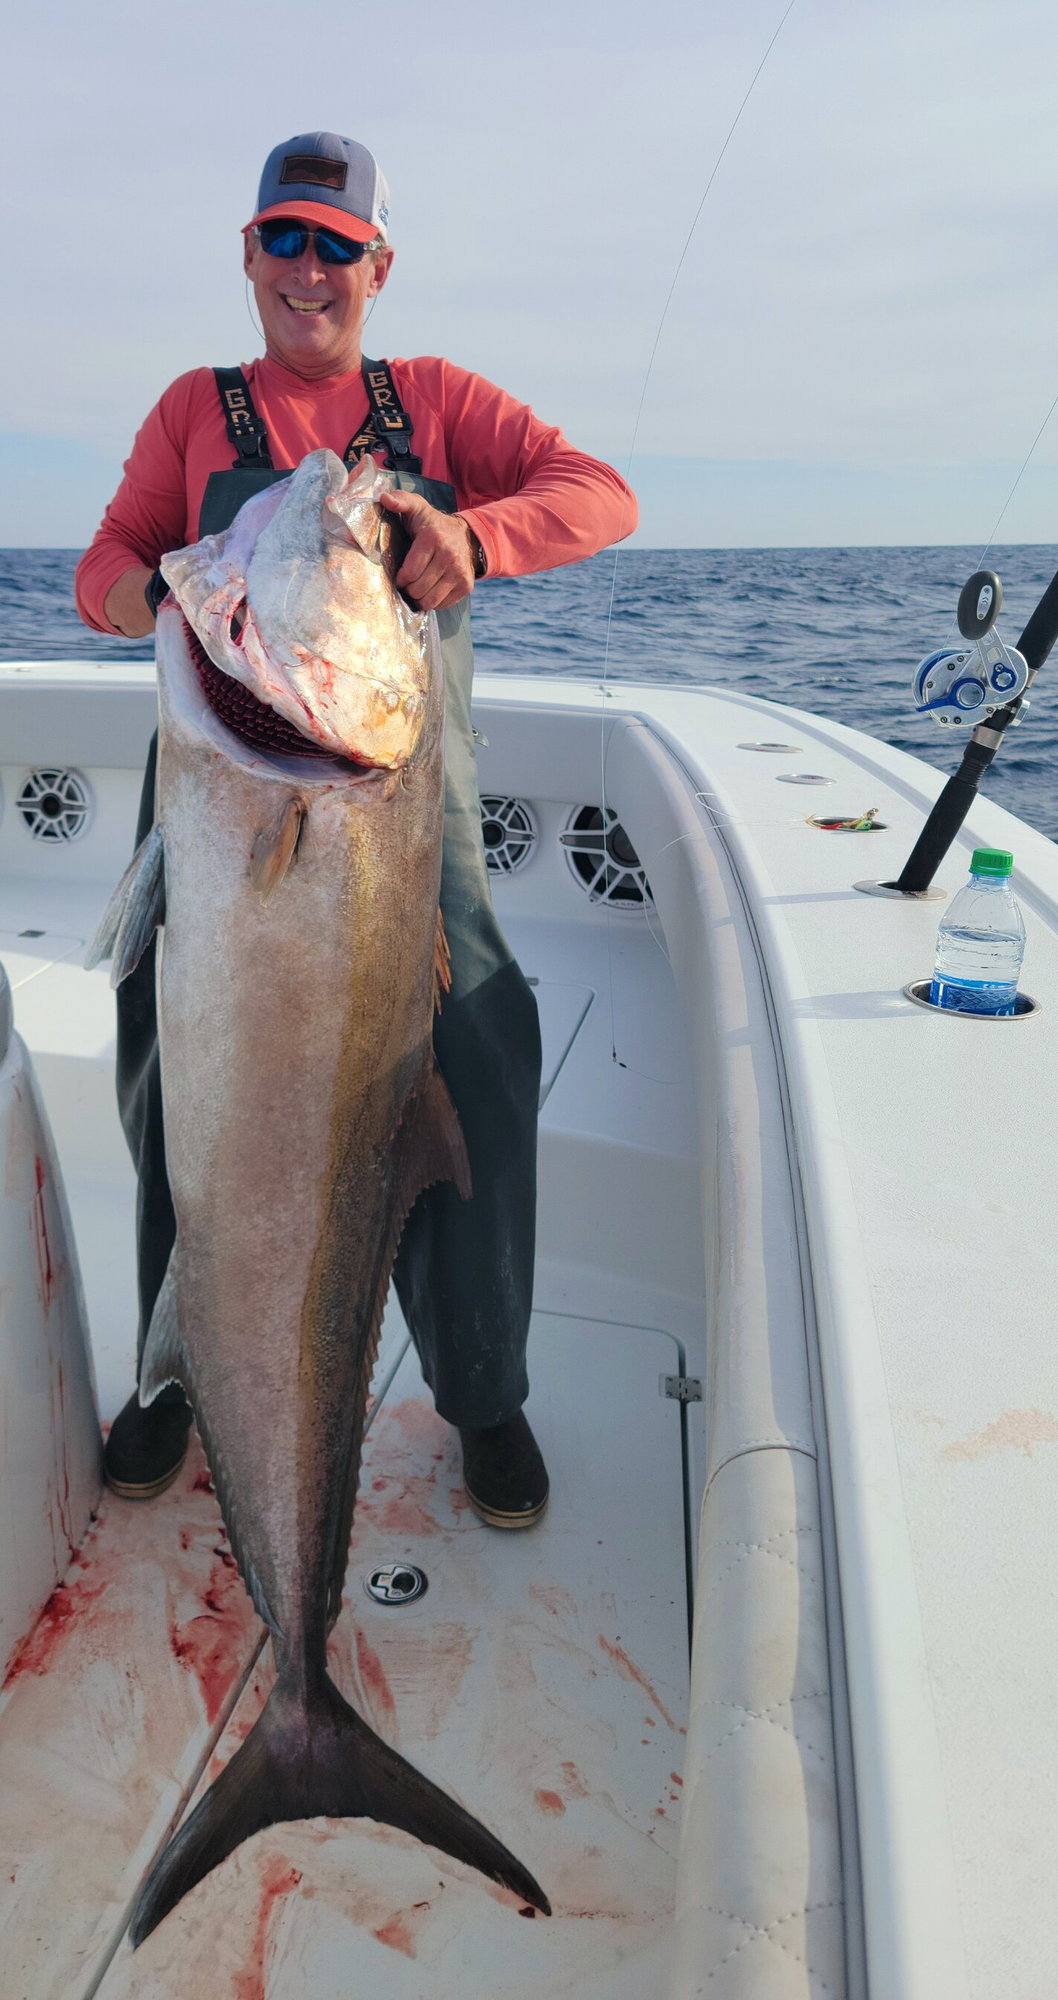 Freeman 42LR catches Giant Amberjack over 100 pounds - The Hull Truth -  Boating and Fishing Forum